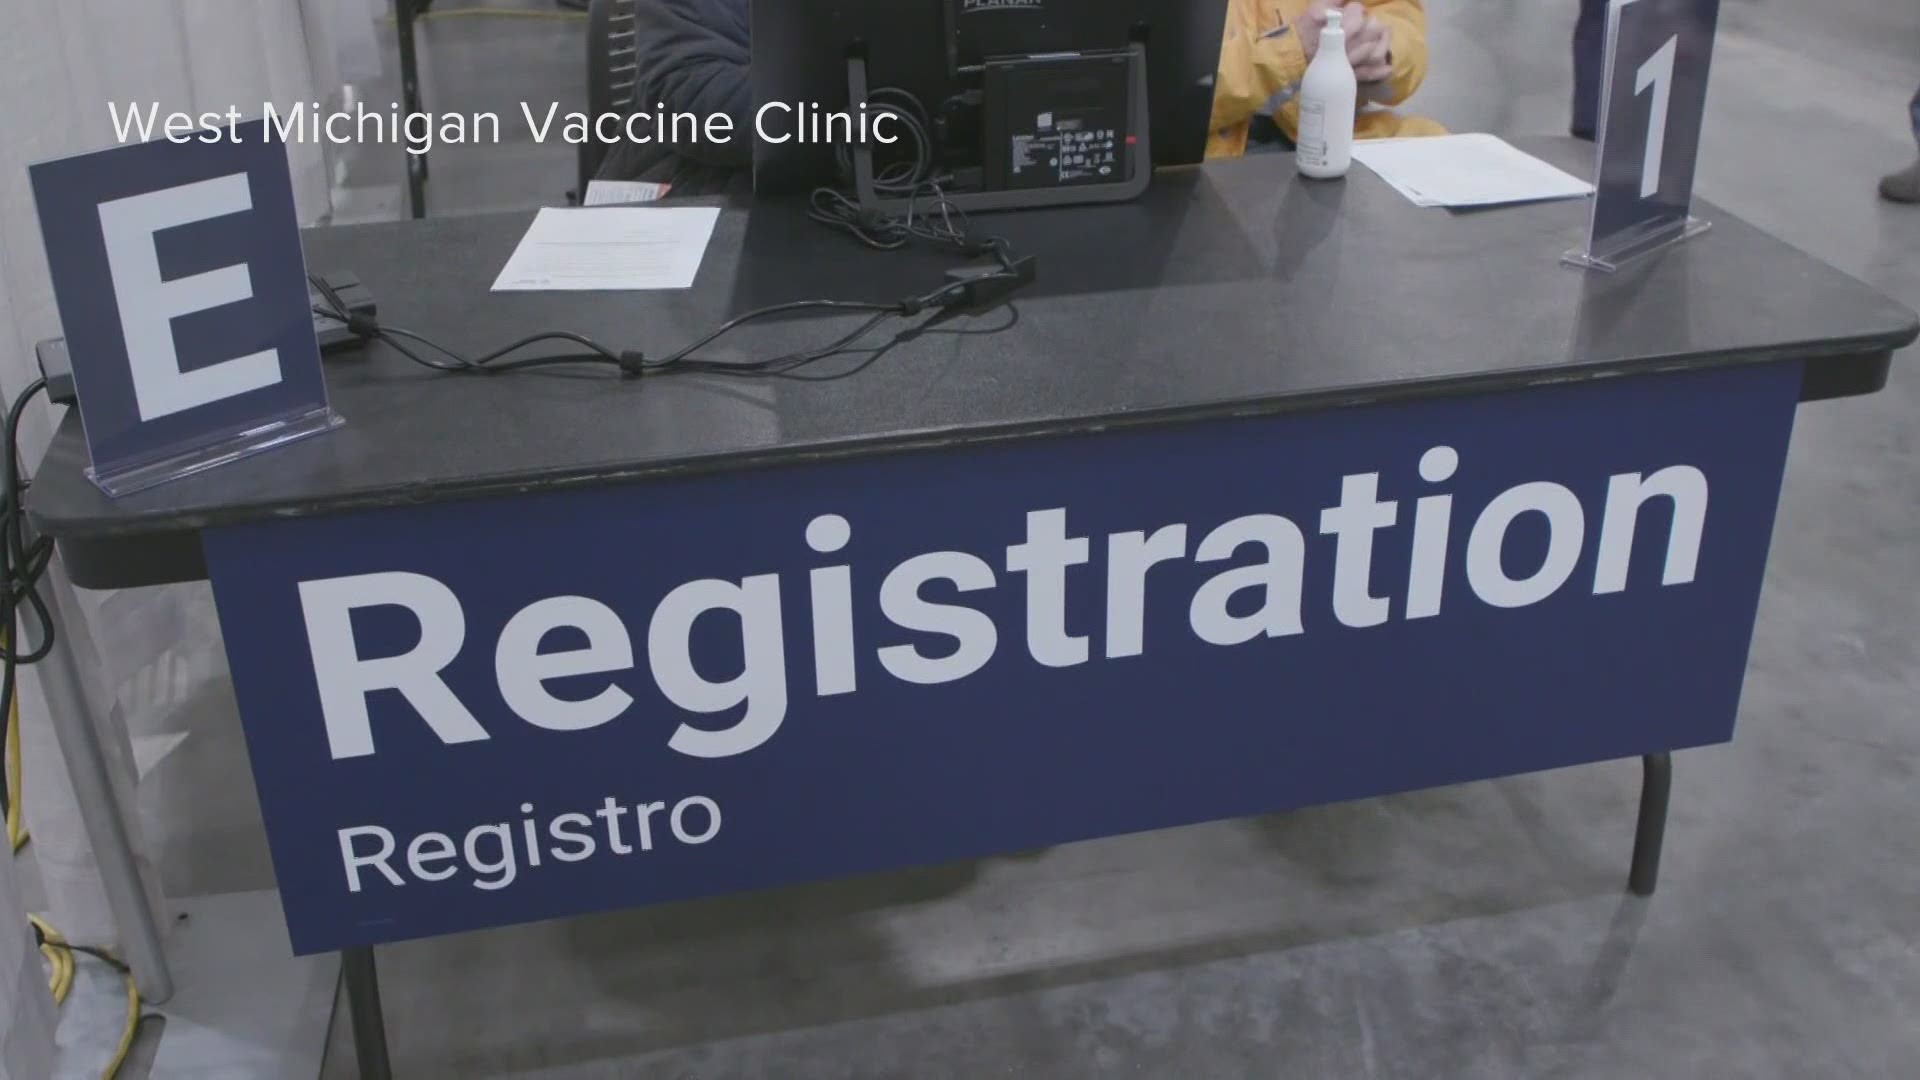 Registering for a vaccine appointment has been difficult, with overwhelmed websites and busy phone lines